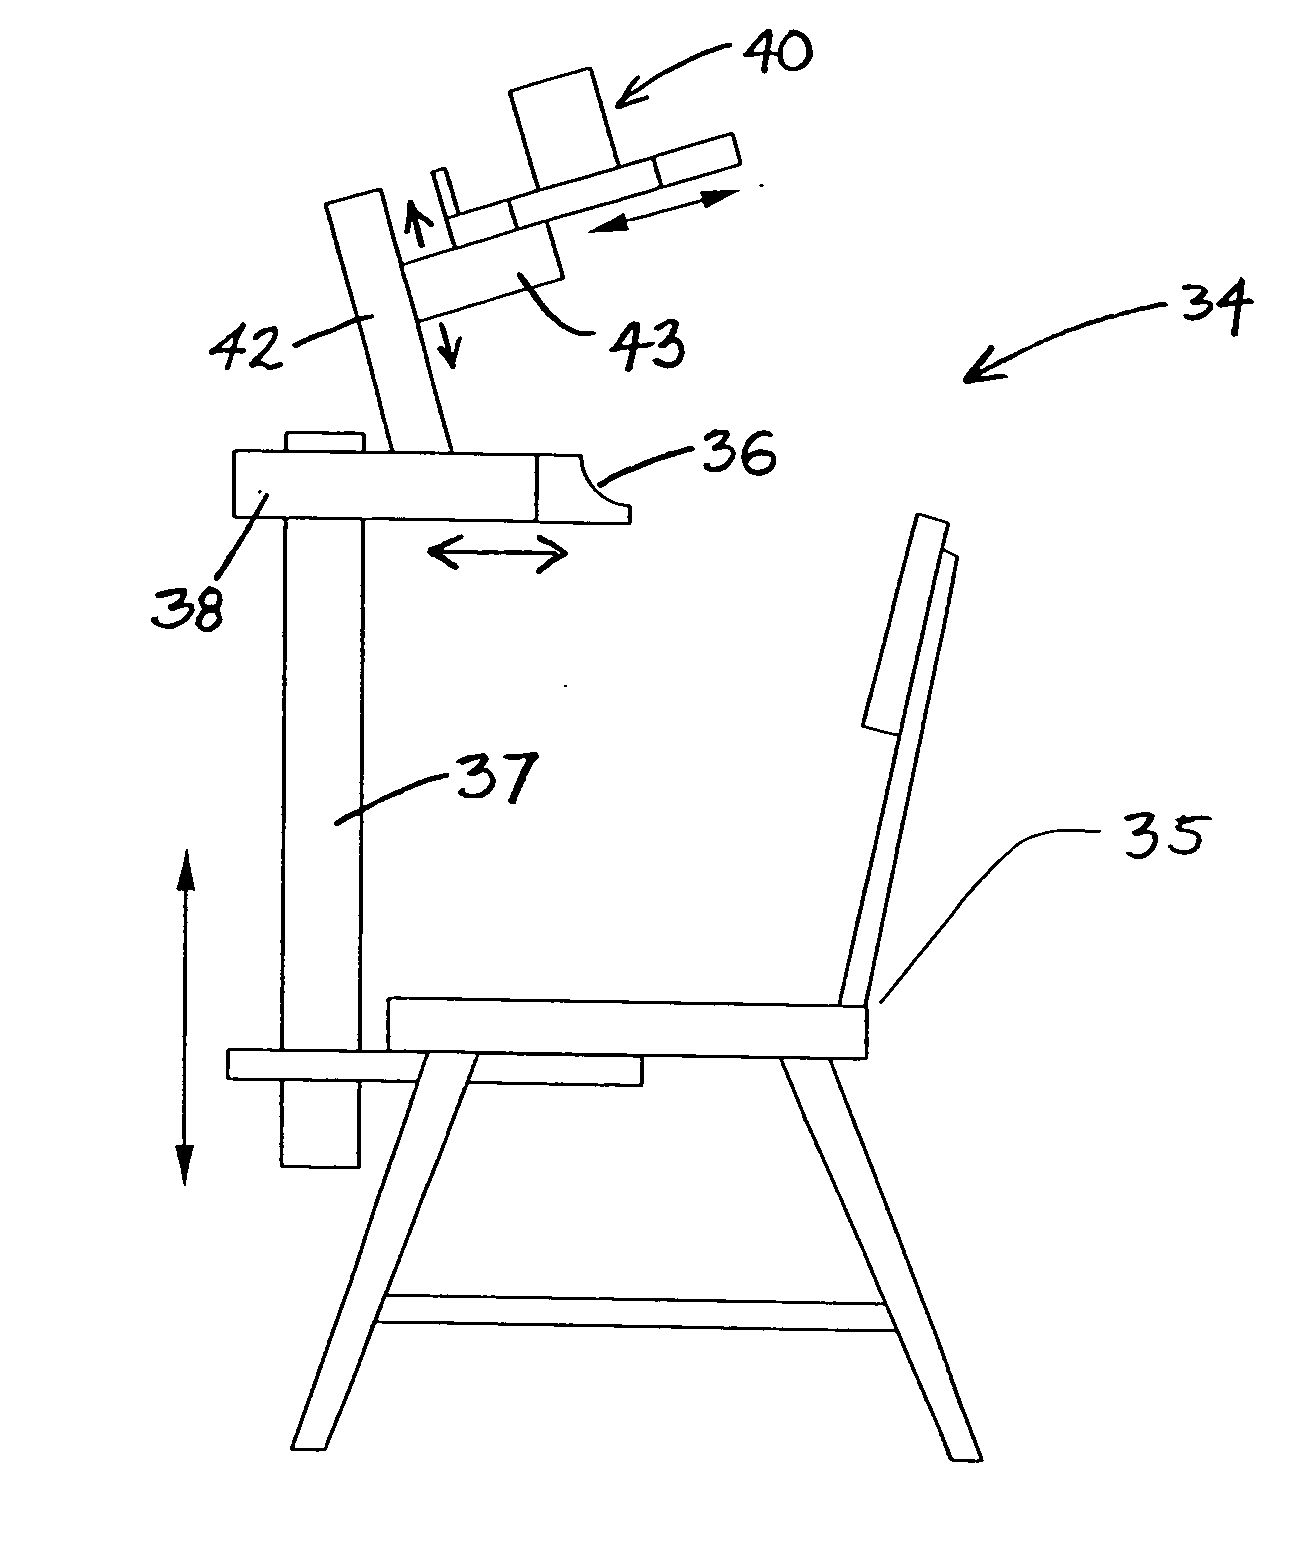 Method and apparatus for manufacturing a custom fit optical display helmet